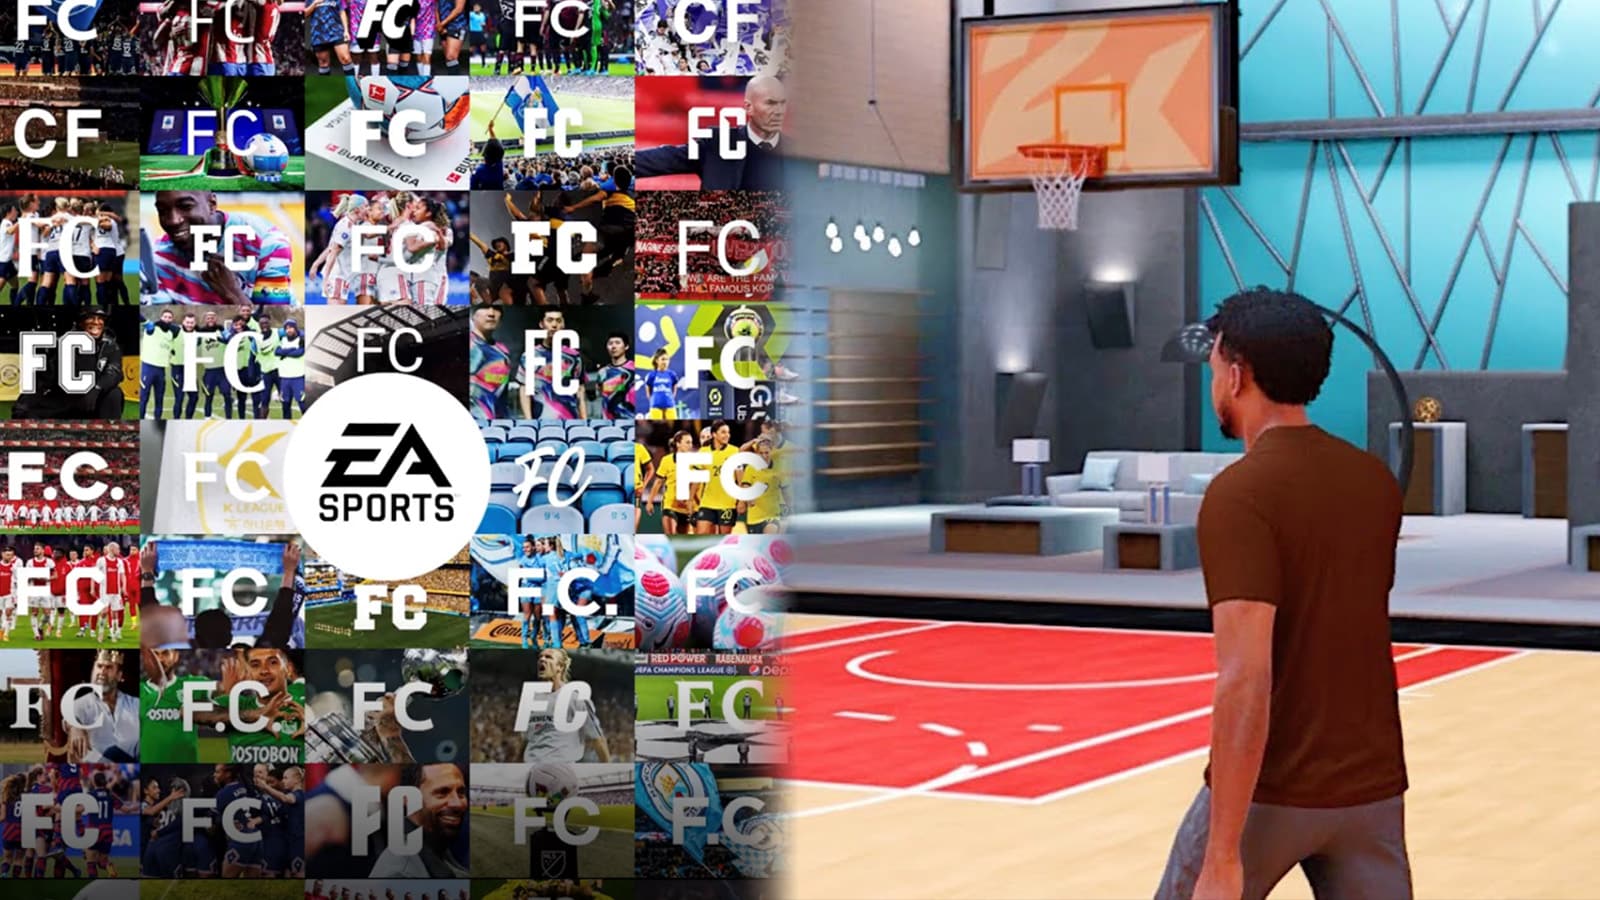 EA SPORTS FC 24 - Official Features & Leaks 